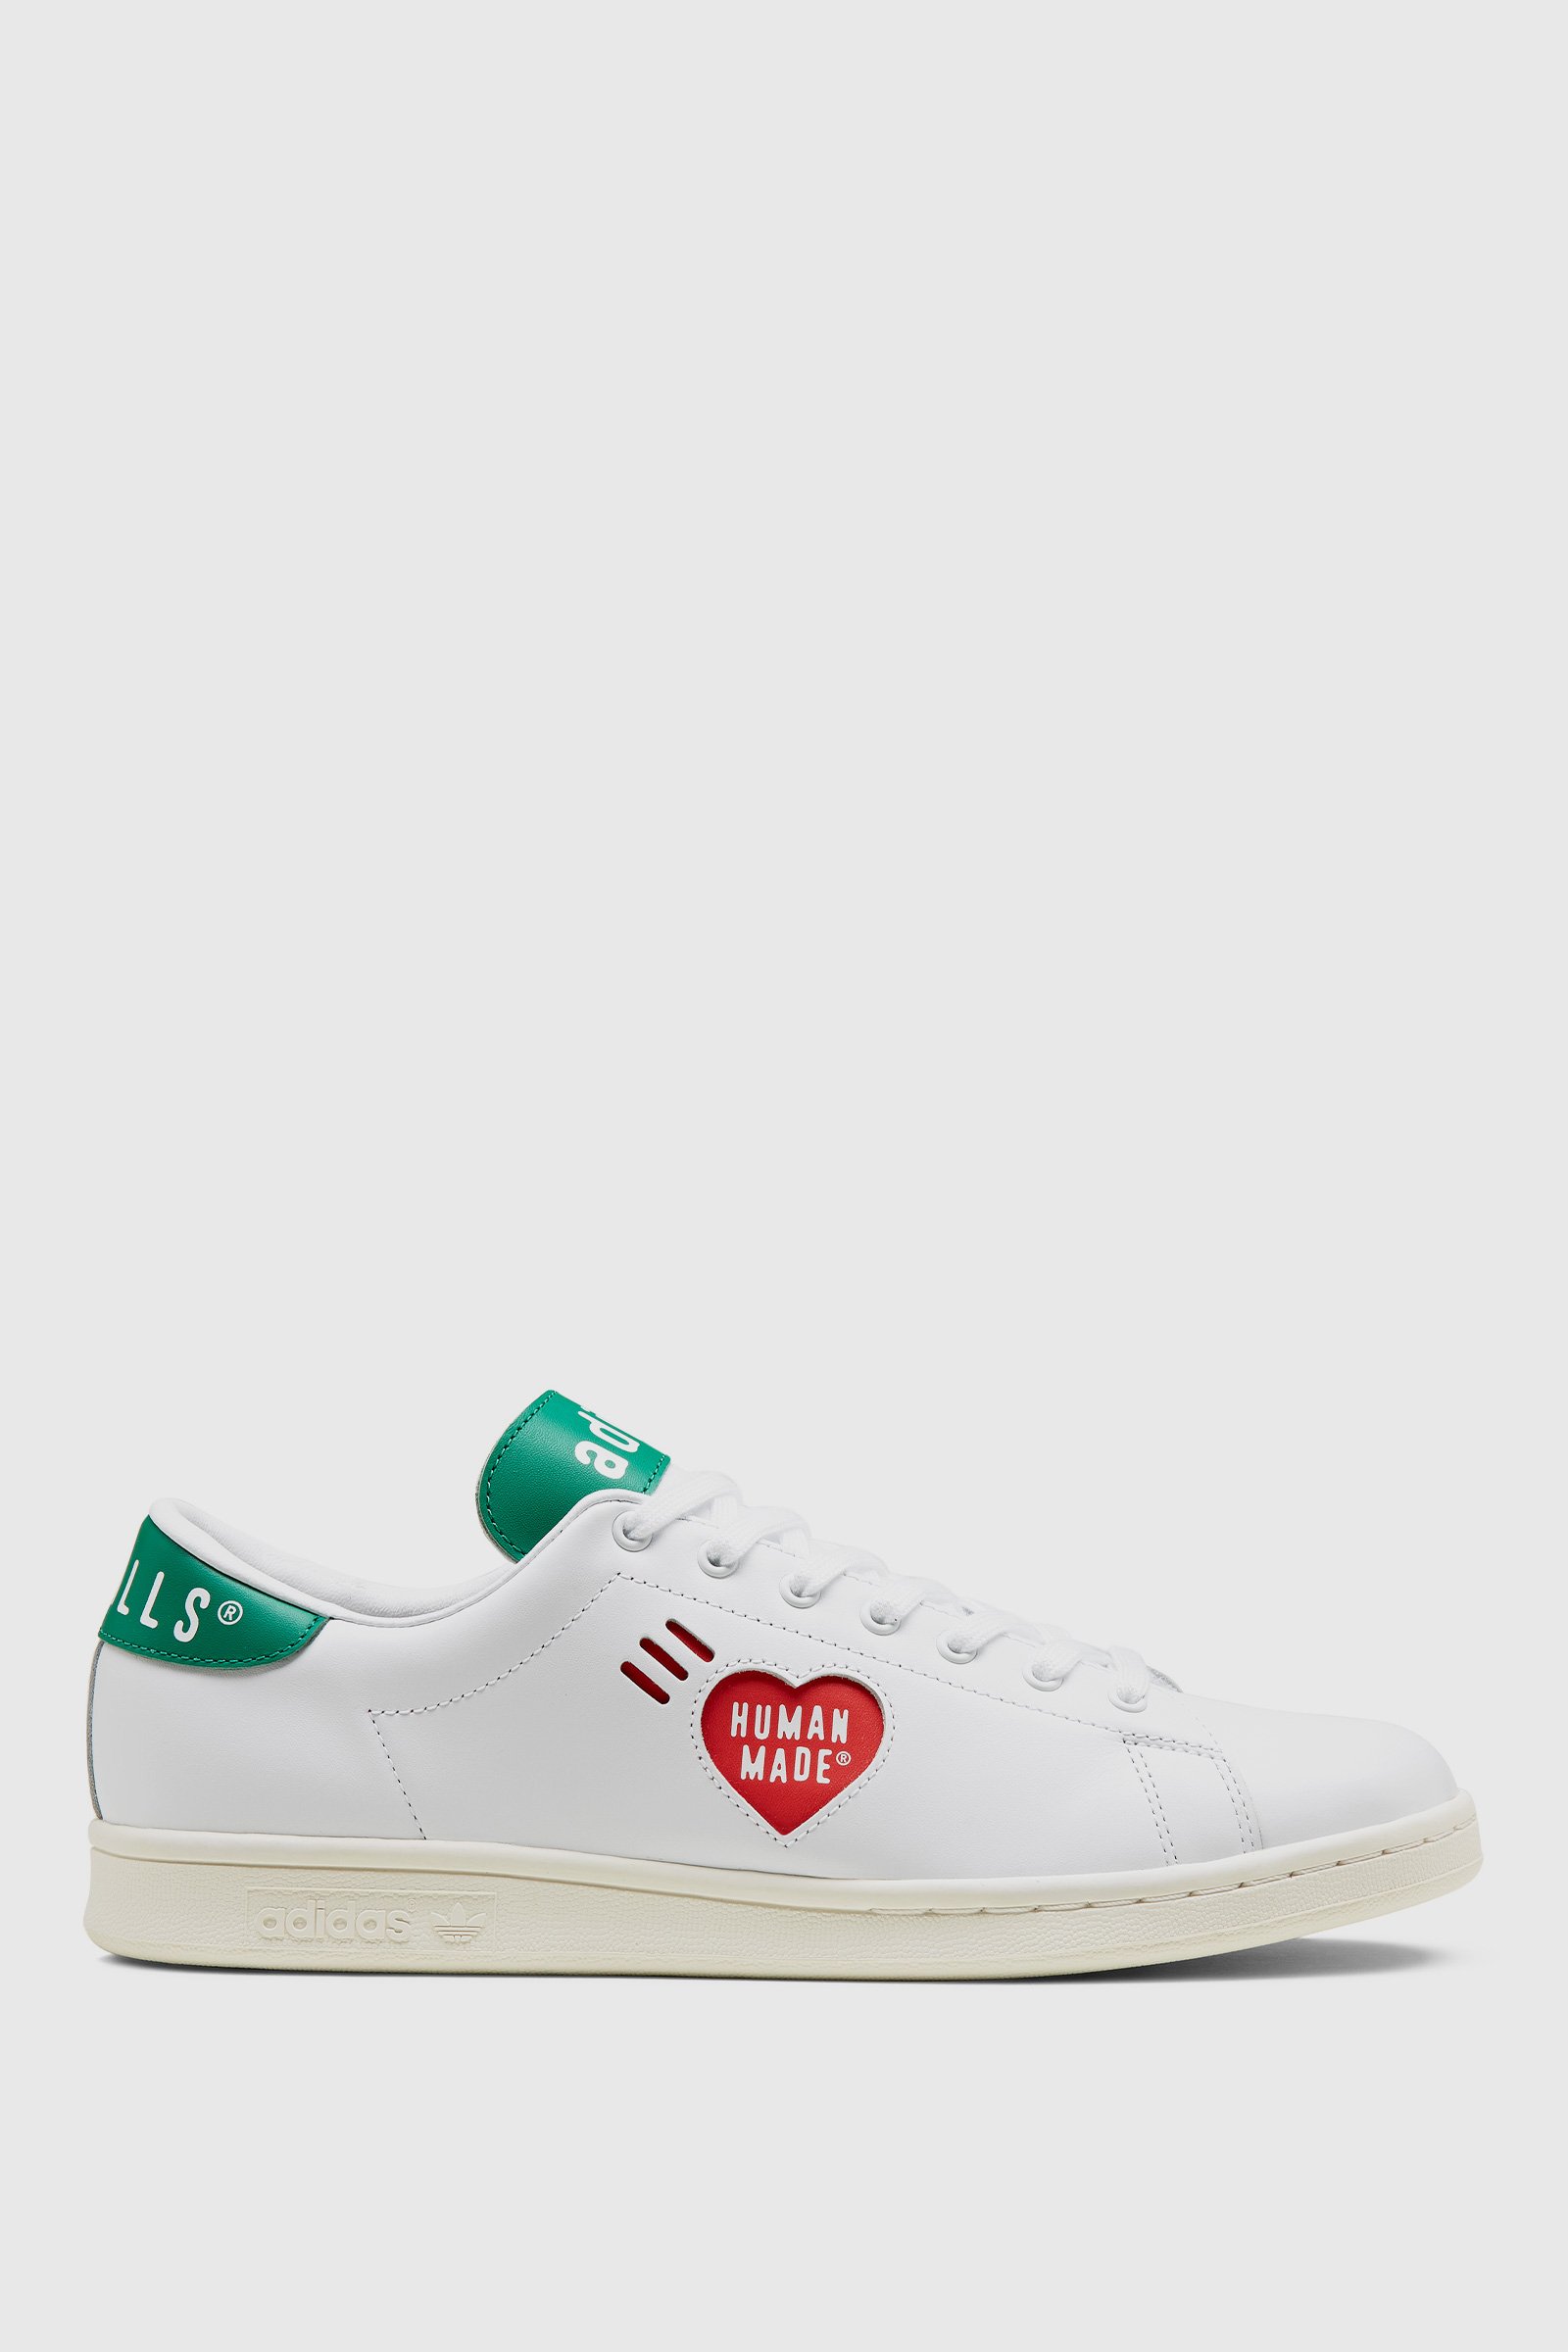 stan smith cost